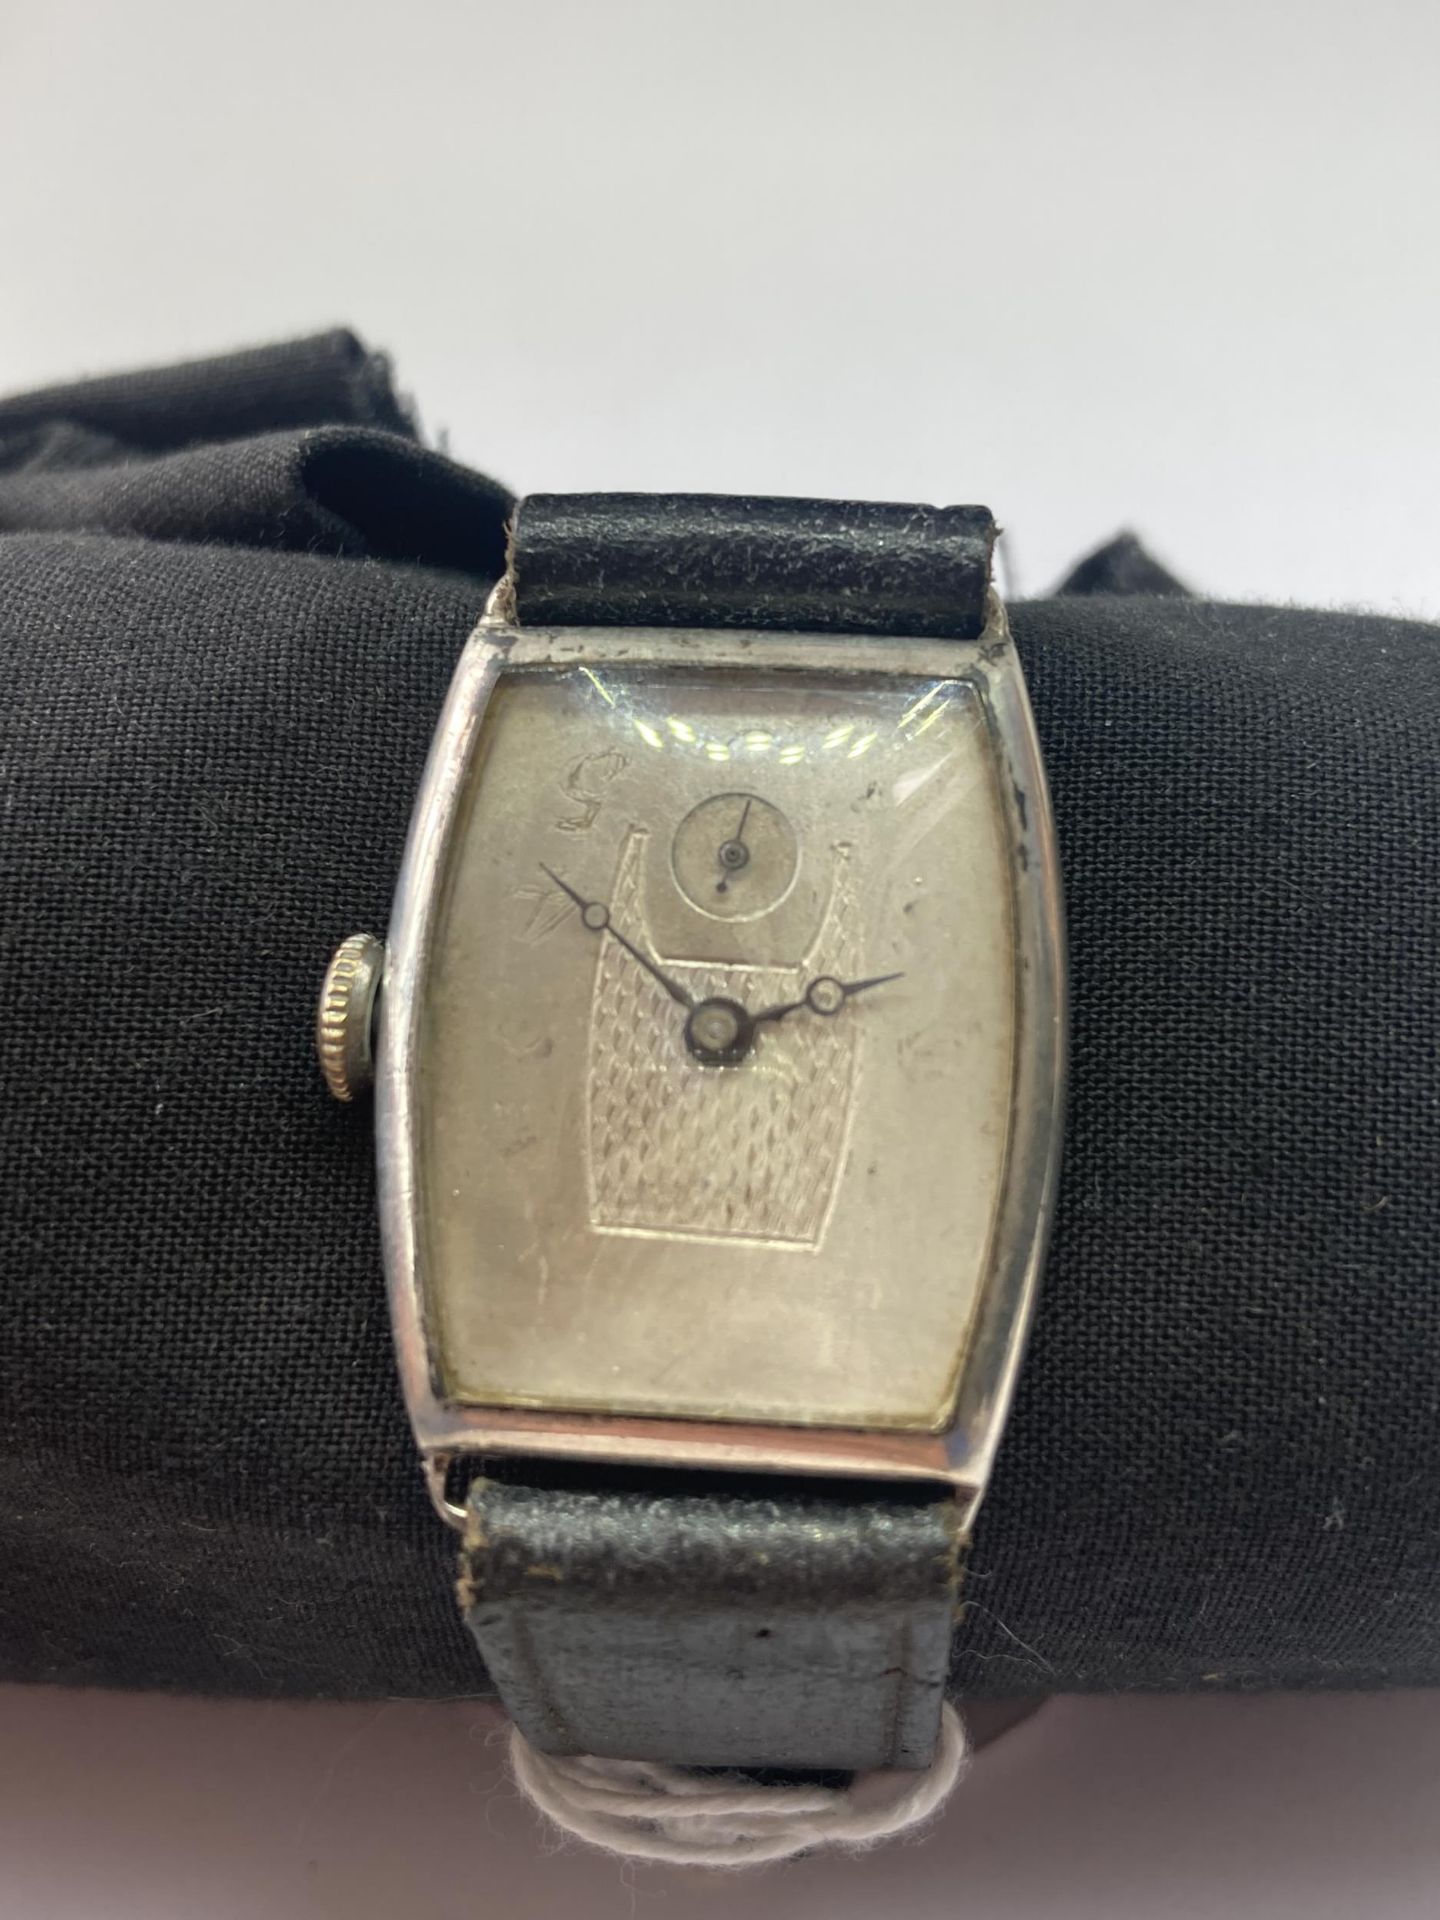 A GENTS SILVER VINTAGE WRIST WATCH SEEN WORKING BUT NO WARRANTY - Image 3 of 3